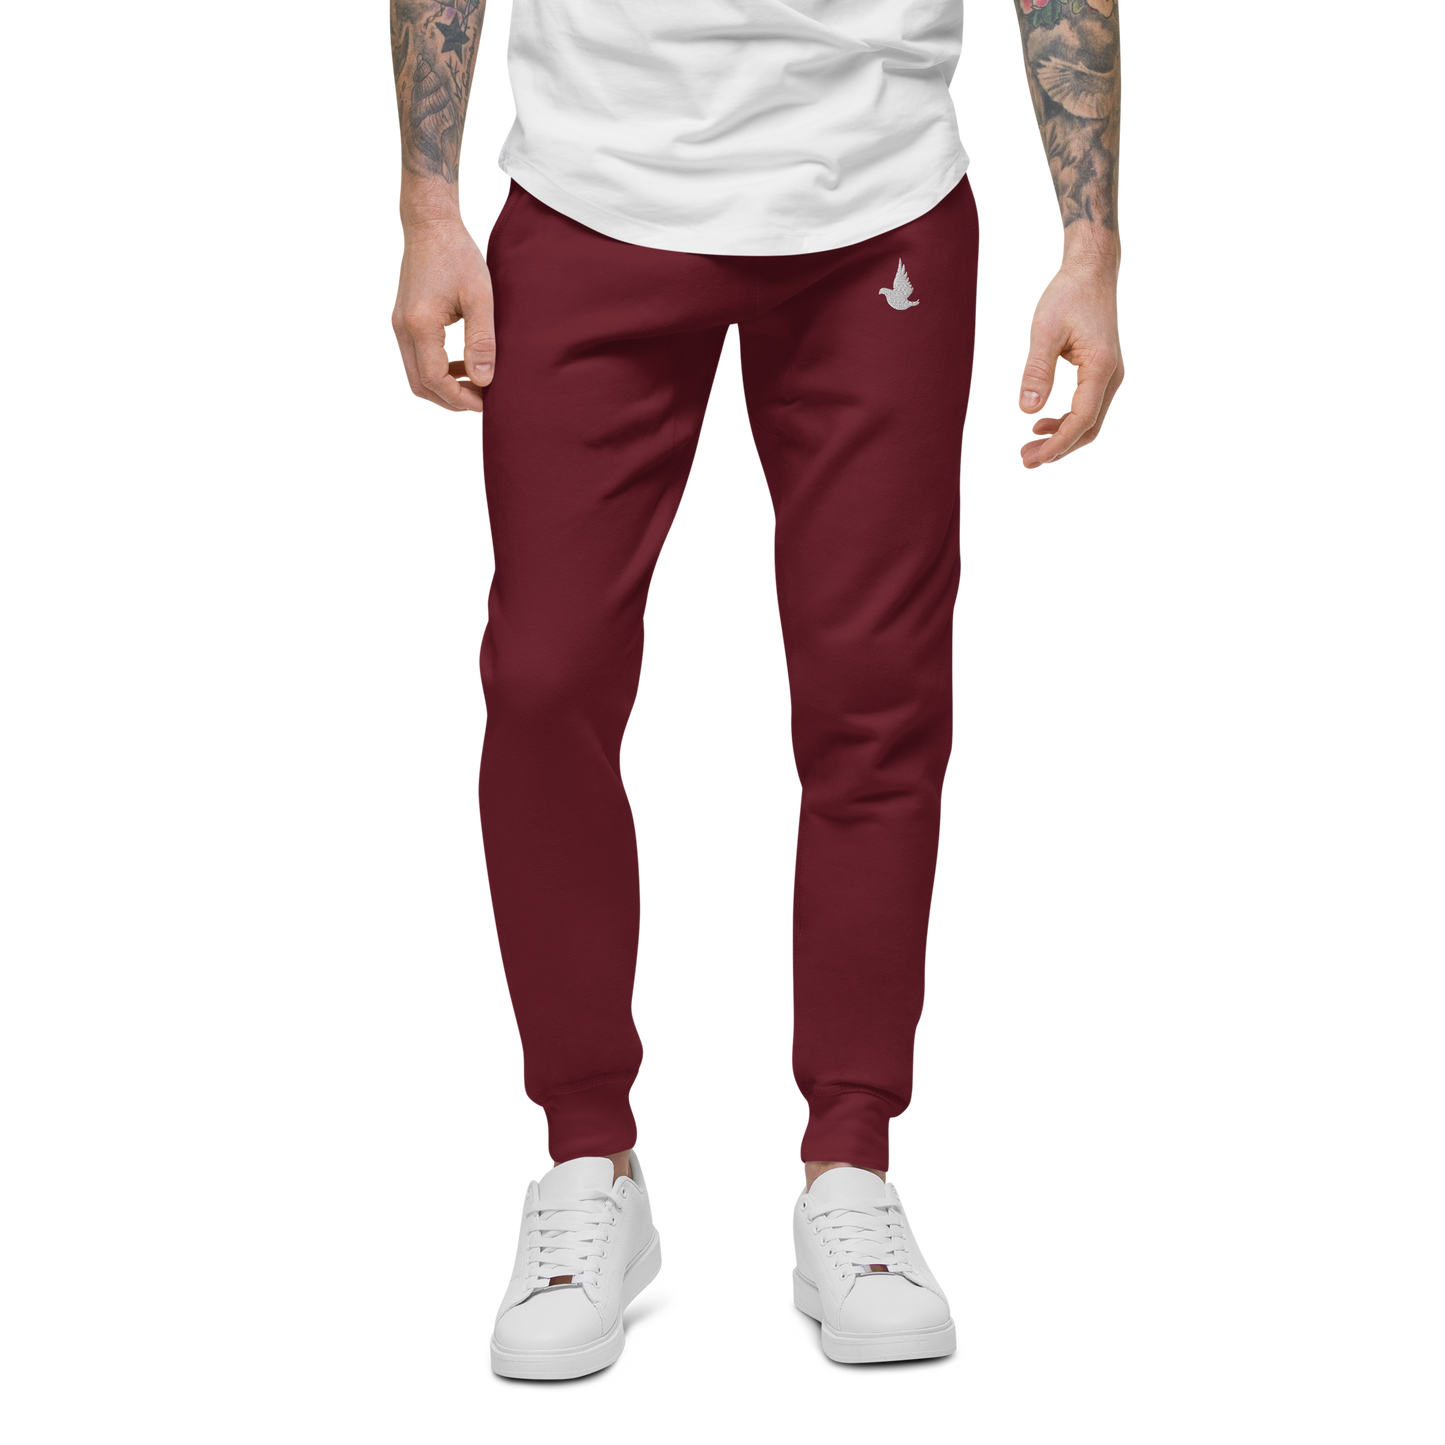 Meek Tribe "Dove Line" Embroidered Cotton Joggers